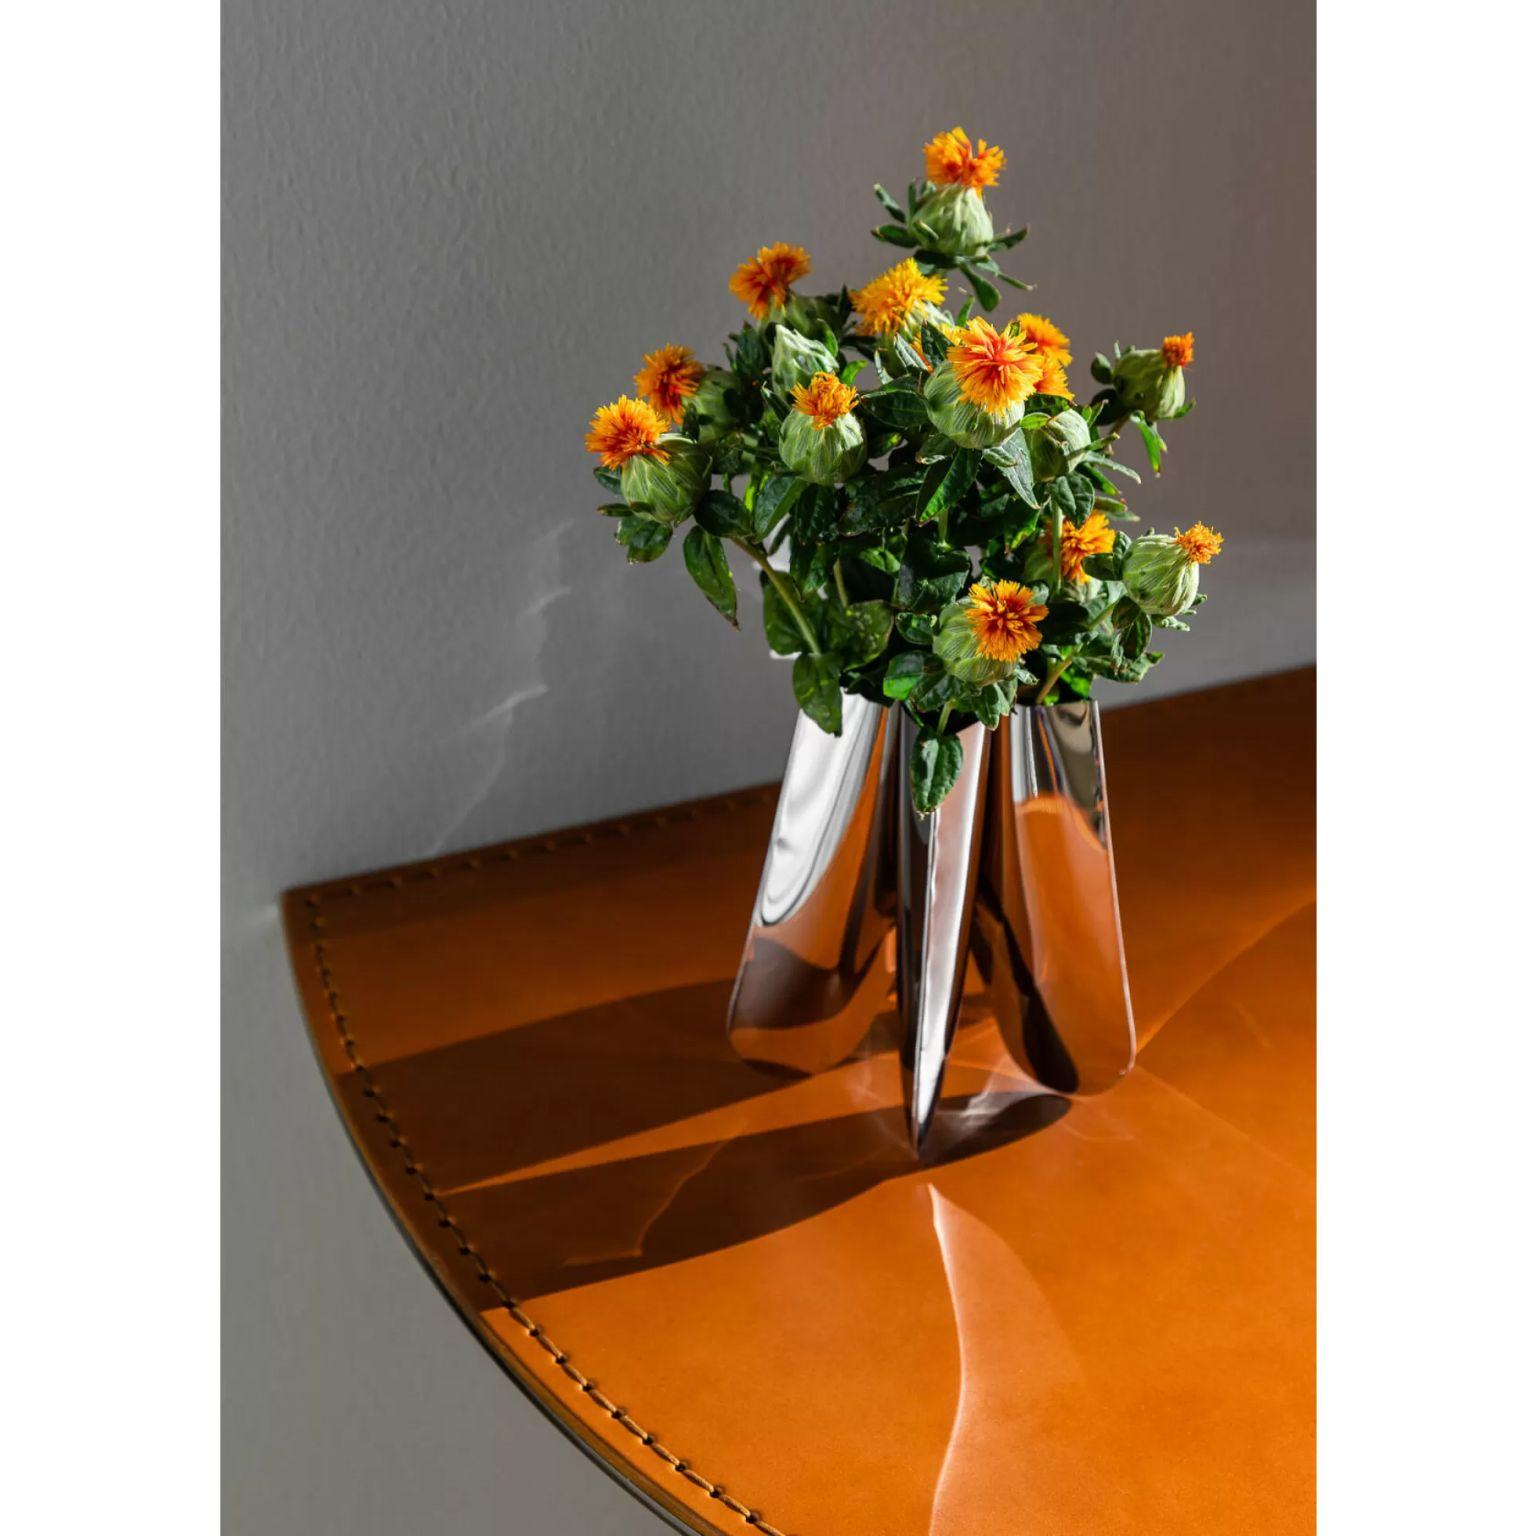 Rotation Vase 30 by Zieta
Dimensions: Ø 20 x H 30 cm.
Materials: Polished stainless steel.

Flower-like vessel
The ROTATION VASE is the essence of harmonious repetition. The flower-like geometrical composition around the vessel’s axis leads the